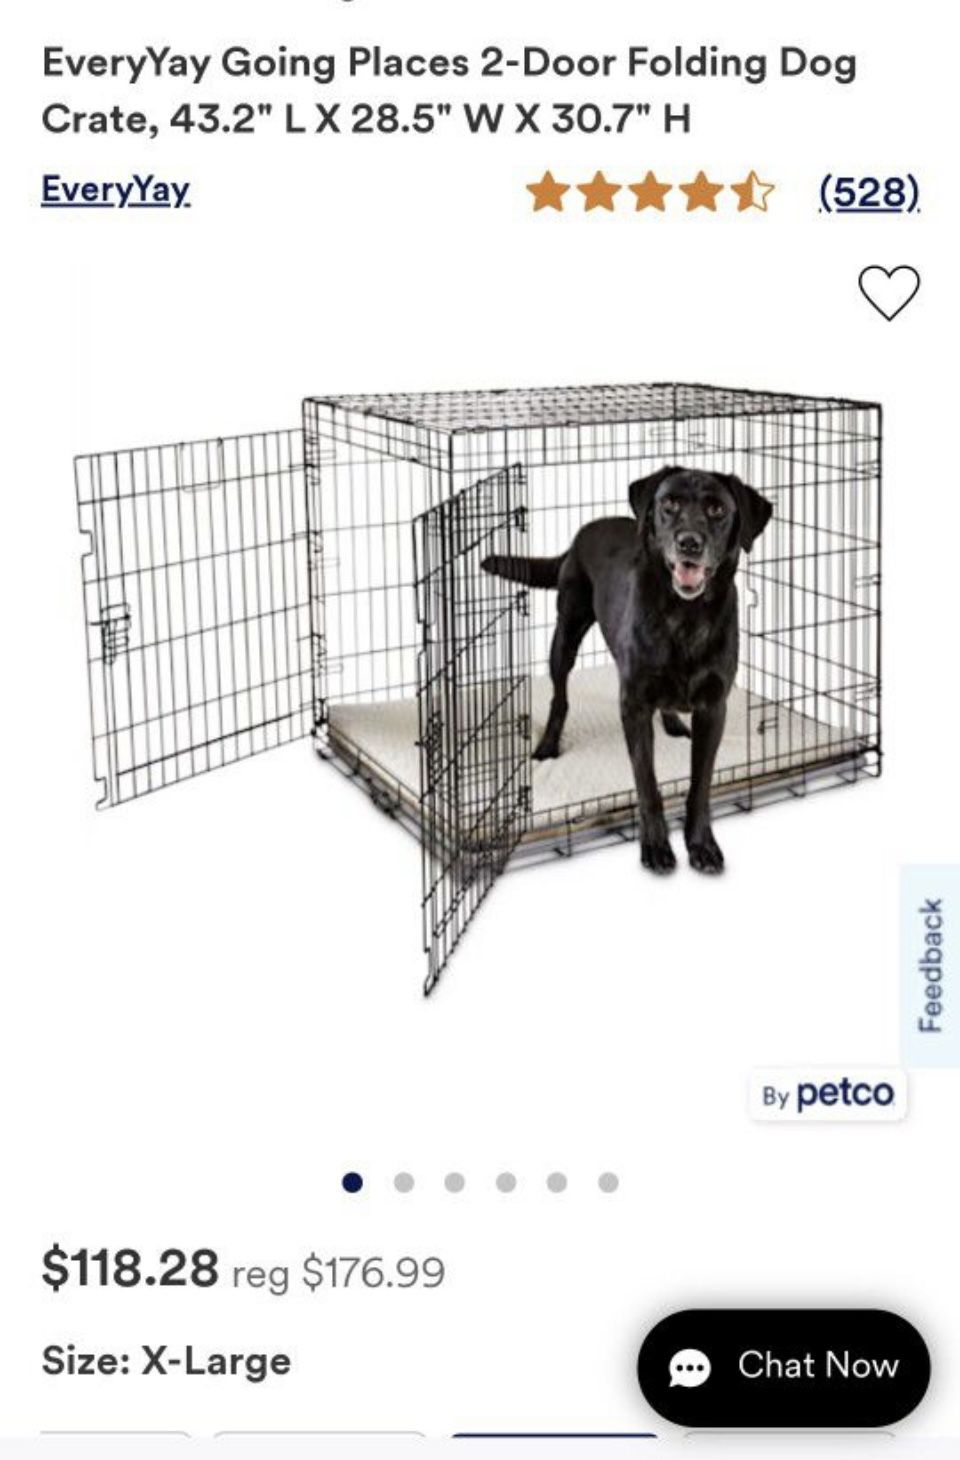 Every Yay Going Places 2-door Folding Dog Crate